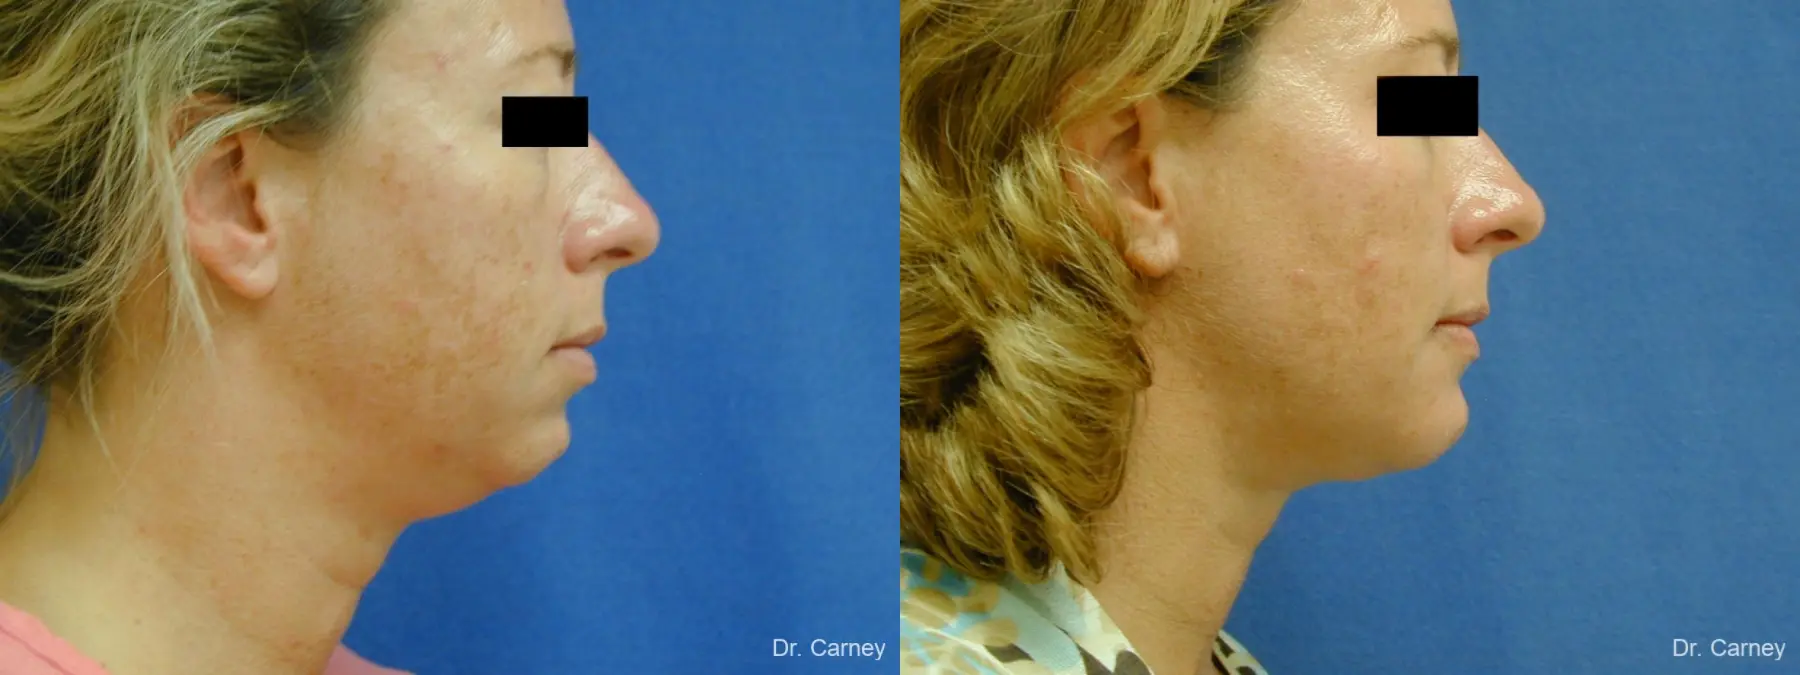 Virginia Beach Neck Lift 1267 - Before and After